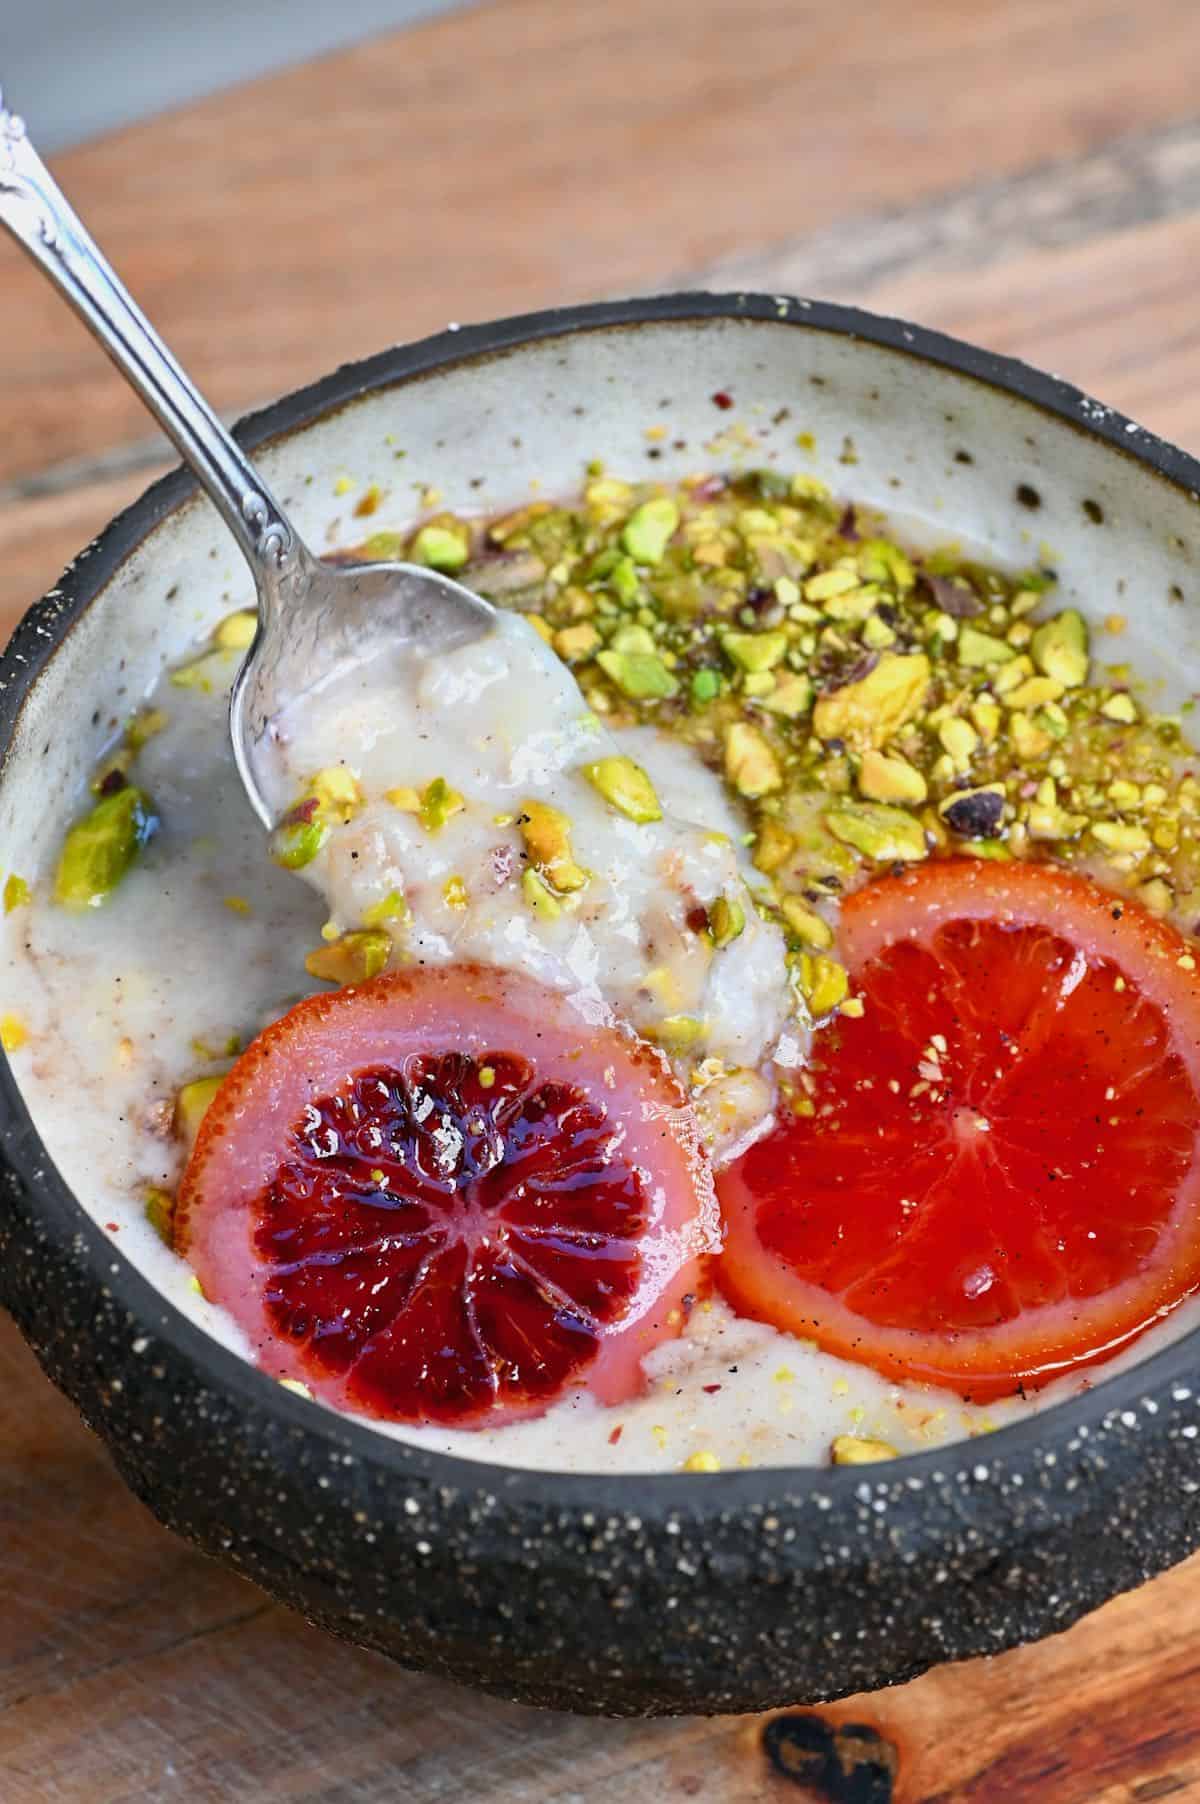 Banana oatmeal in a bowl topped with pistachios and orange slices